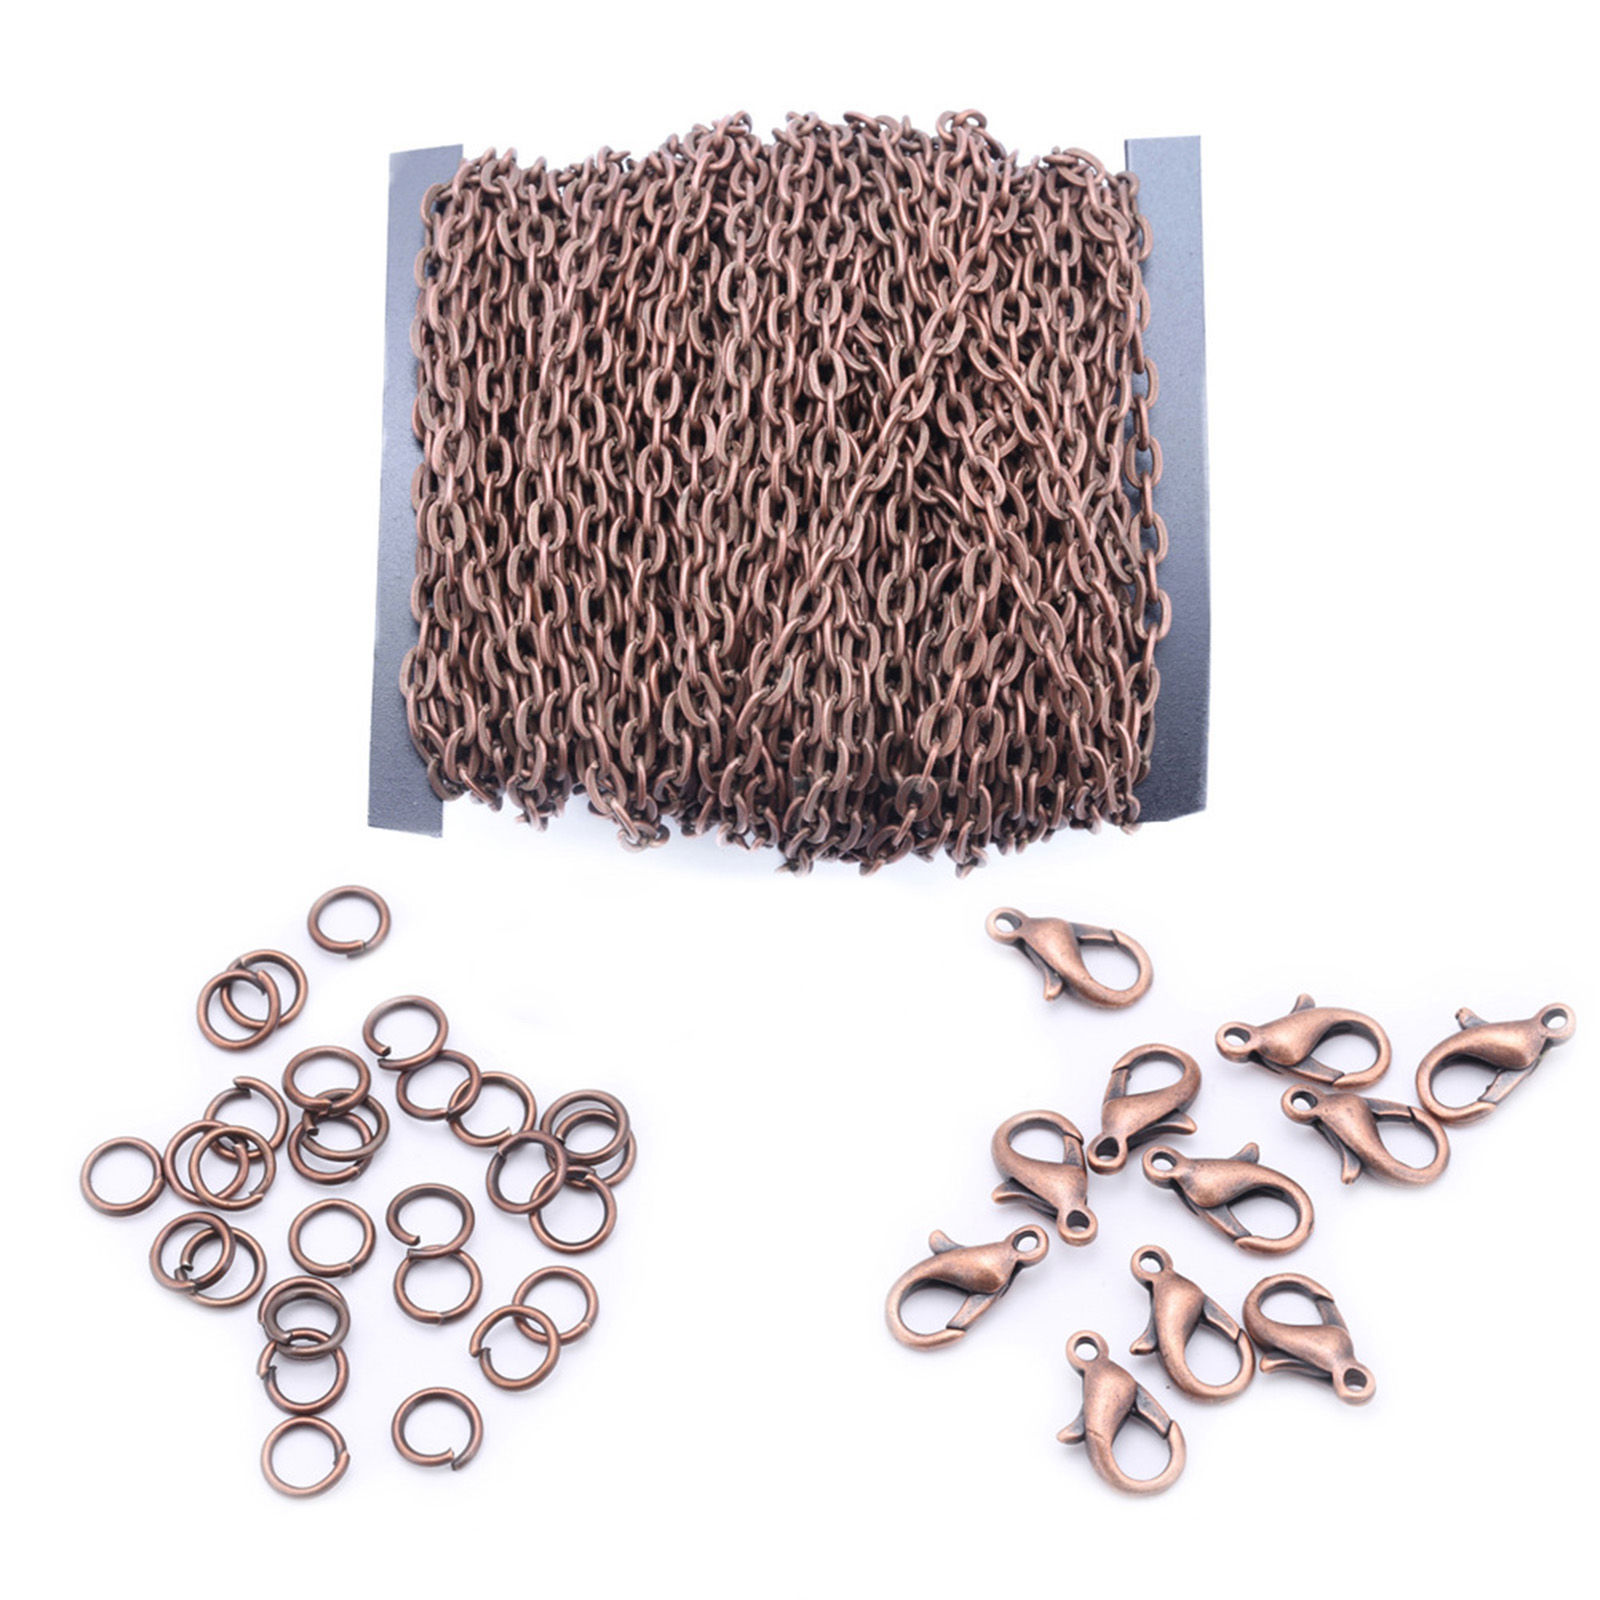 Picture of Iron Based Alloy Jewelry DIY Earring Necklace Bracelet 4x3mm Chain Lobster Clasp Jump Ring Accessories Findings Antique Copper 15cm x 12cm, 1 Set